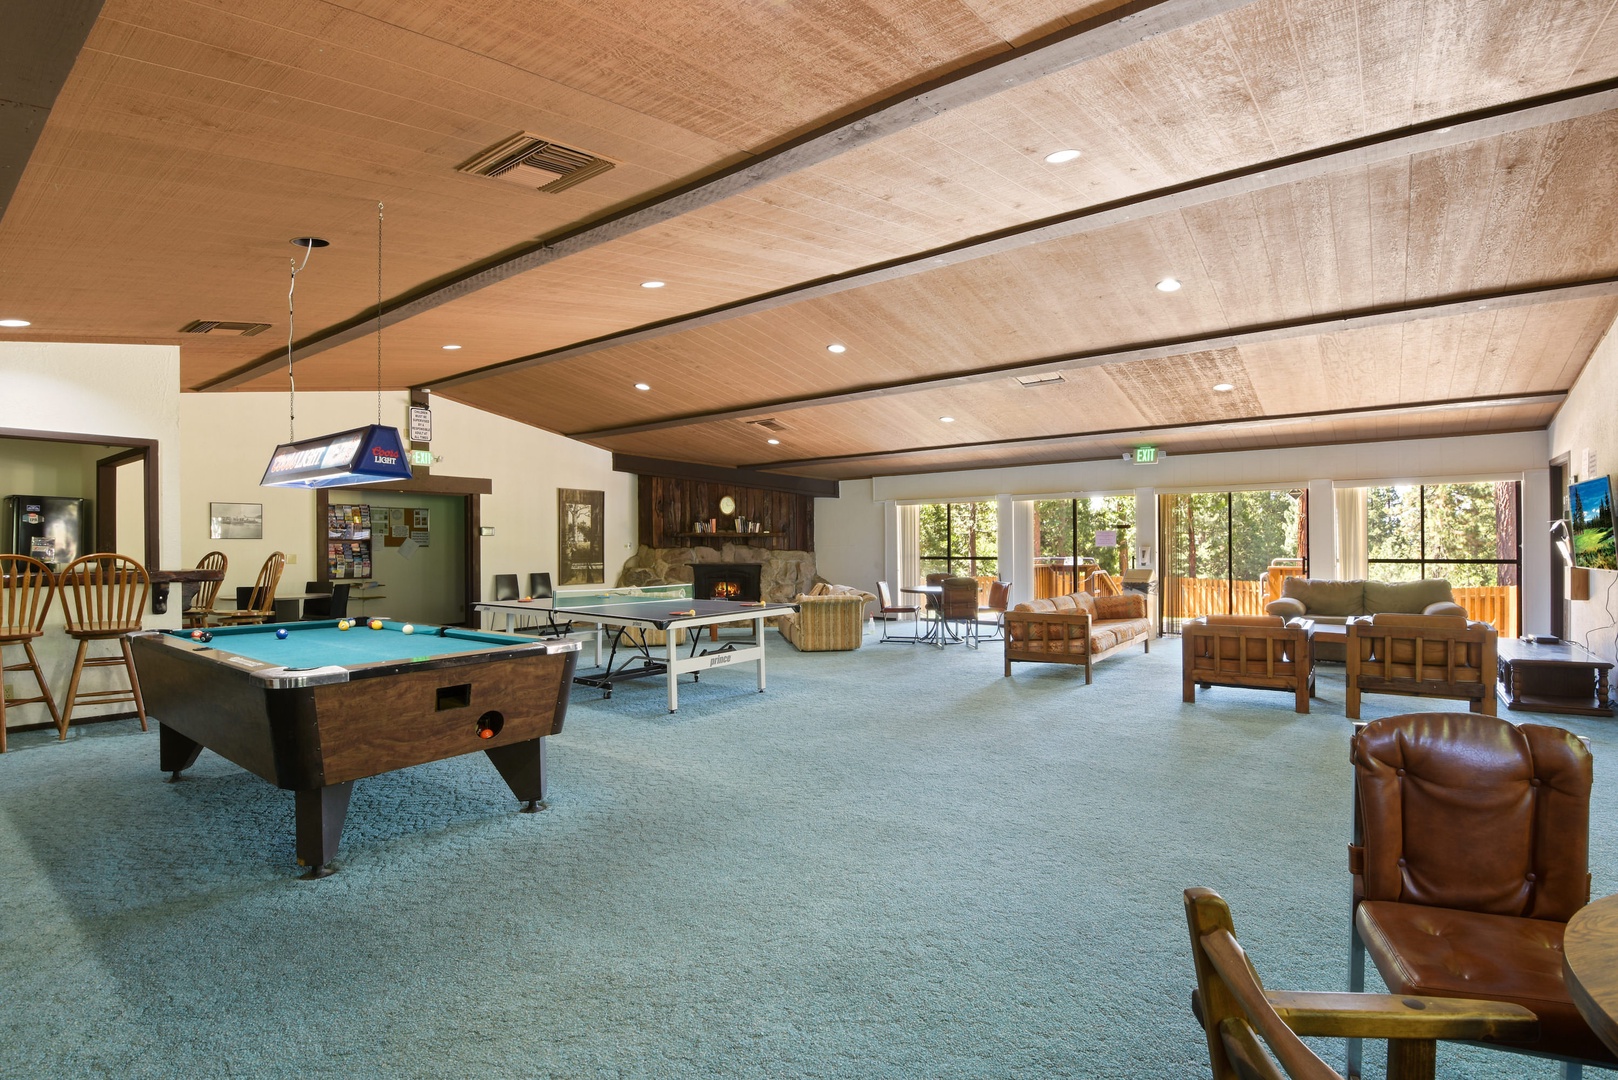 Condo clubhouse with pool table and ping pong table